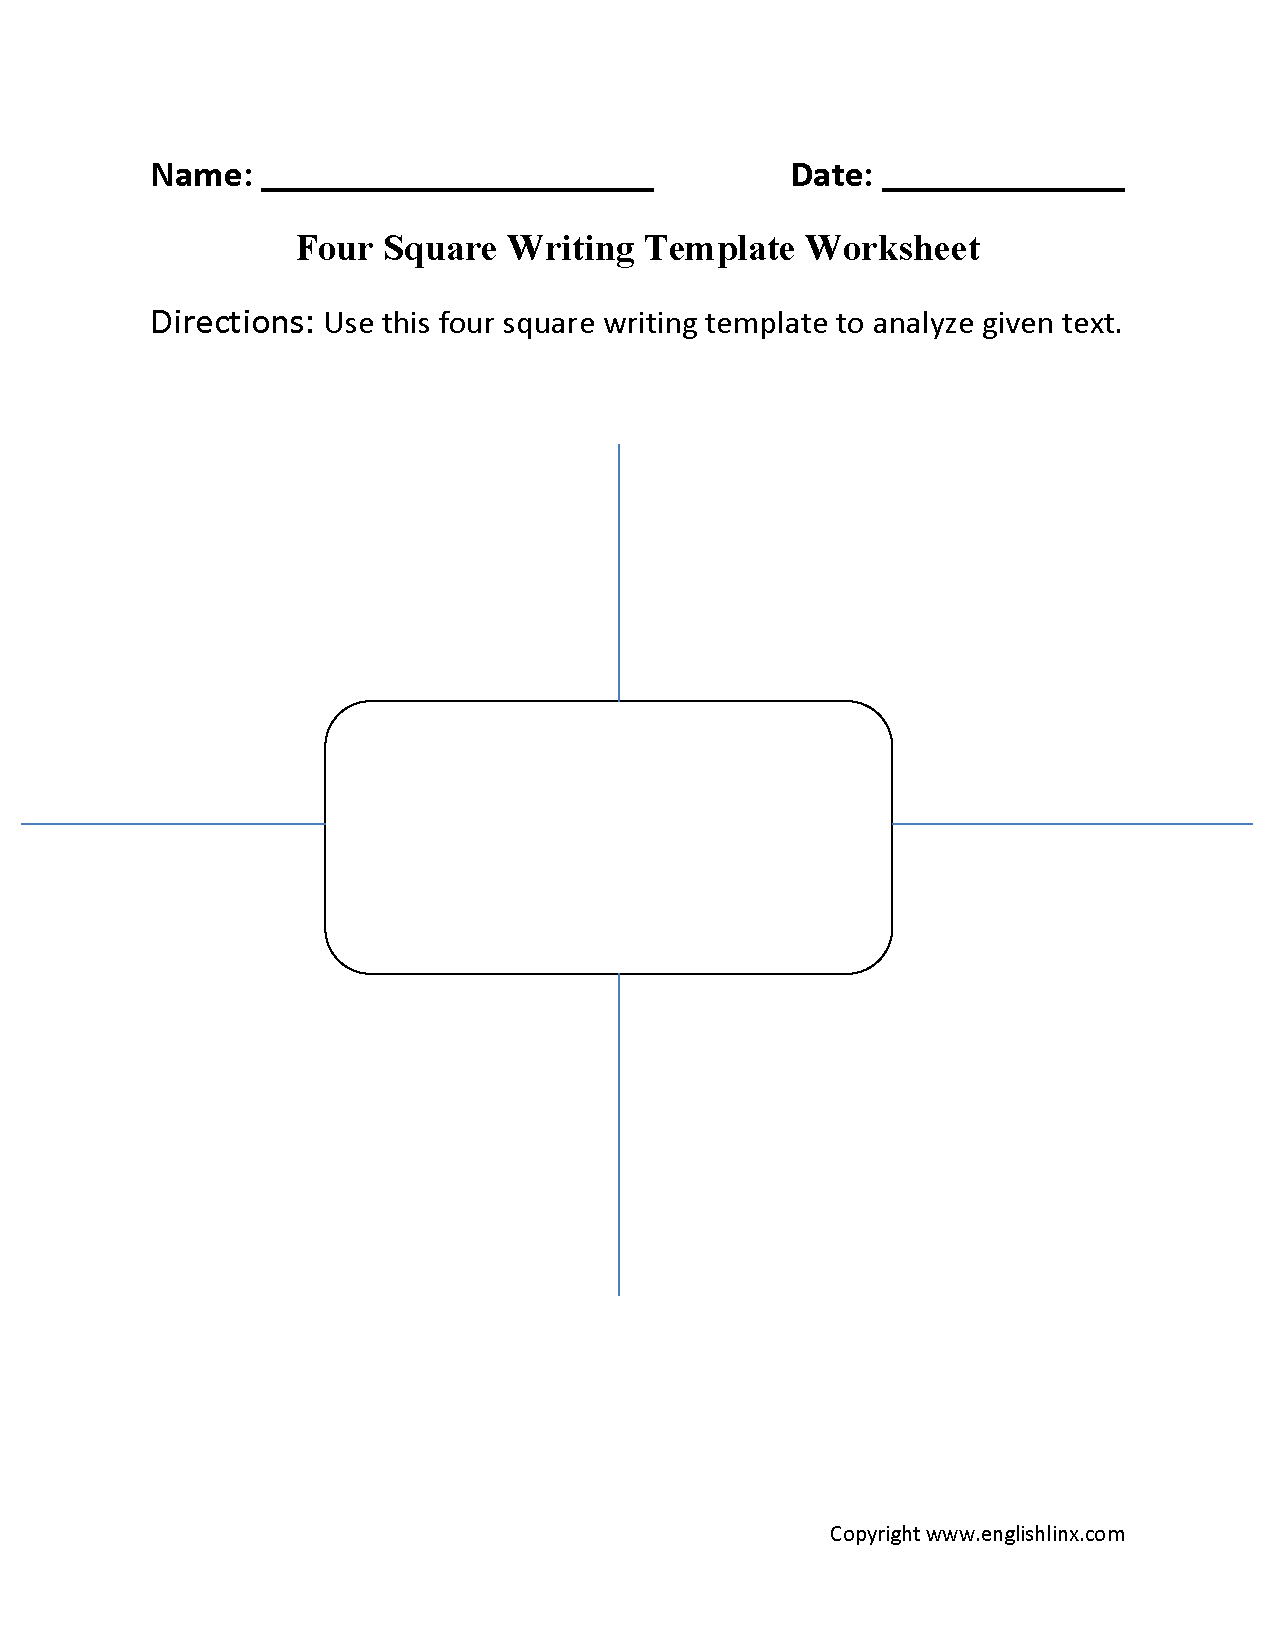 Writing Template Worksheets | Four Square Writing Template With Blank Four Square Writing Template